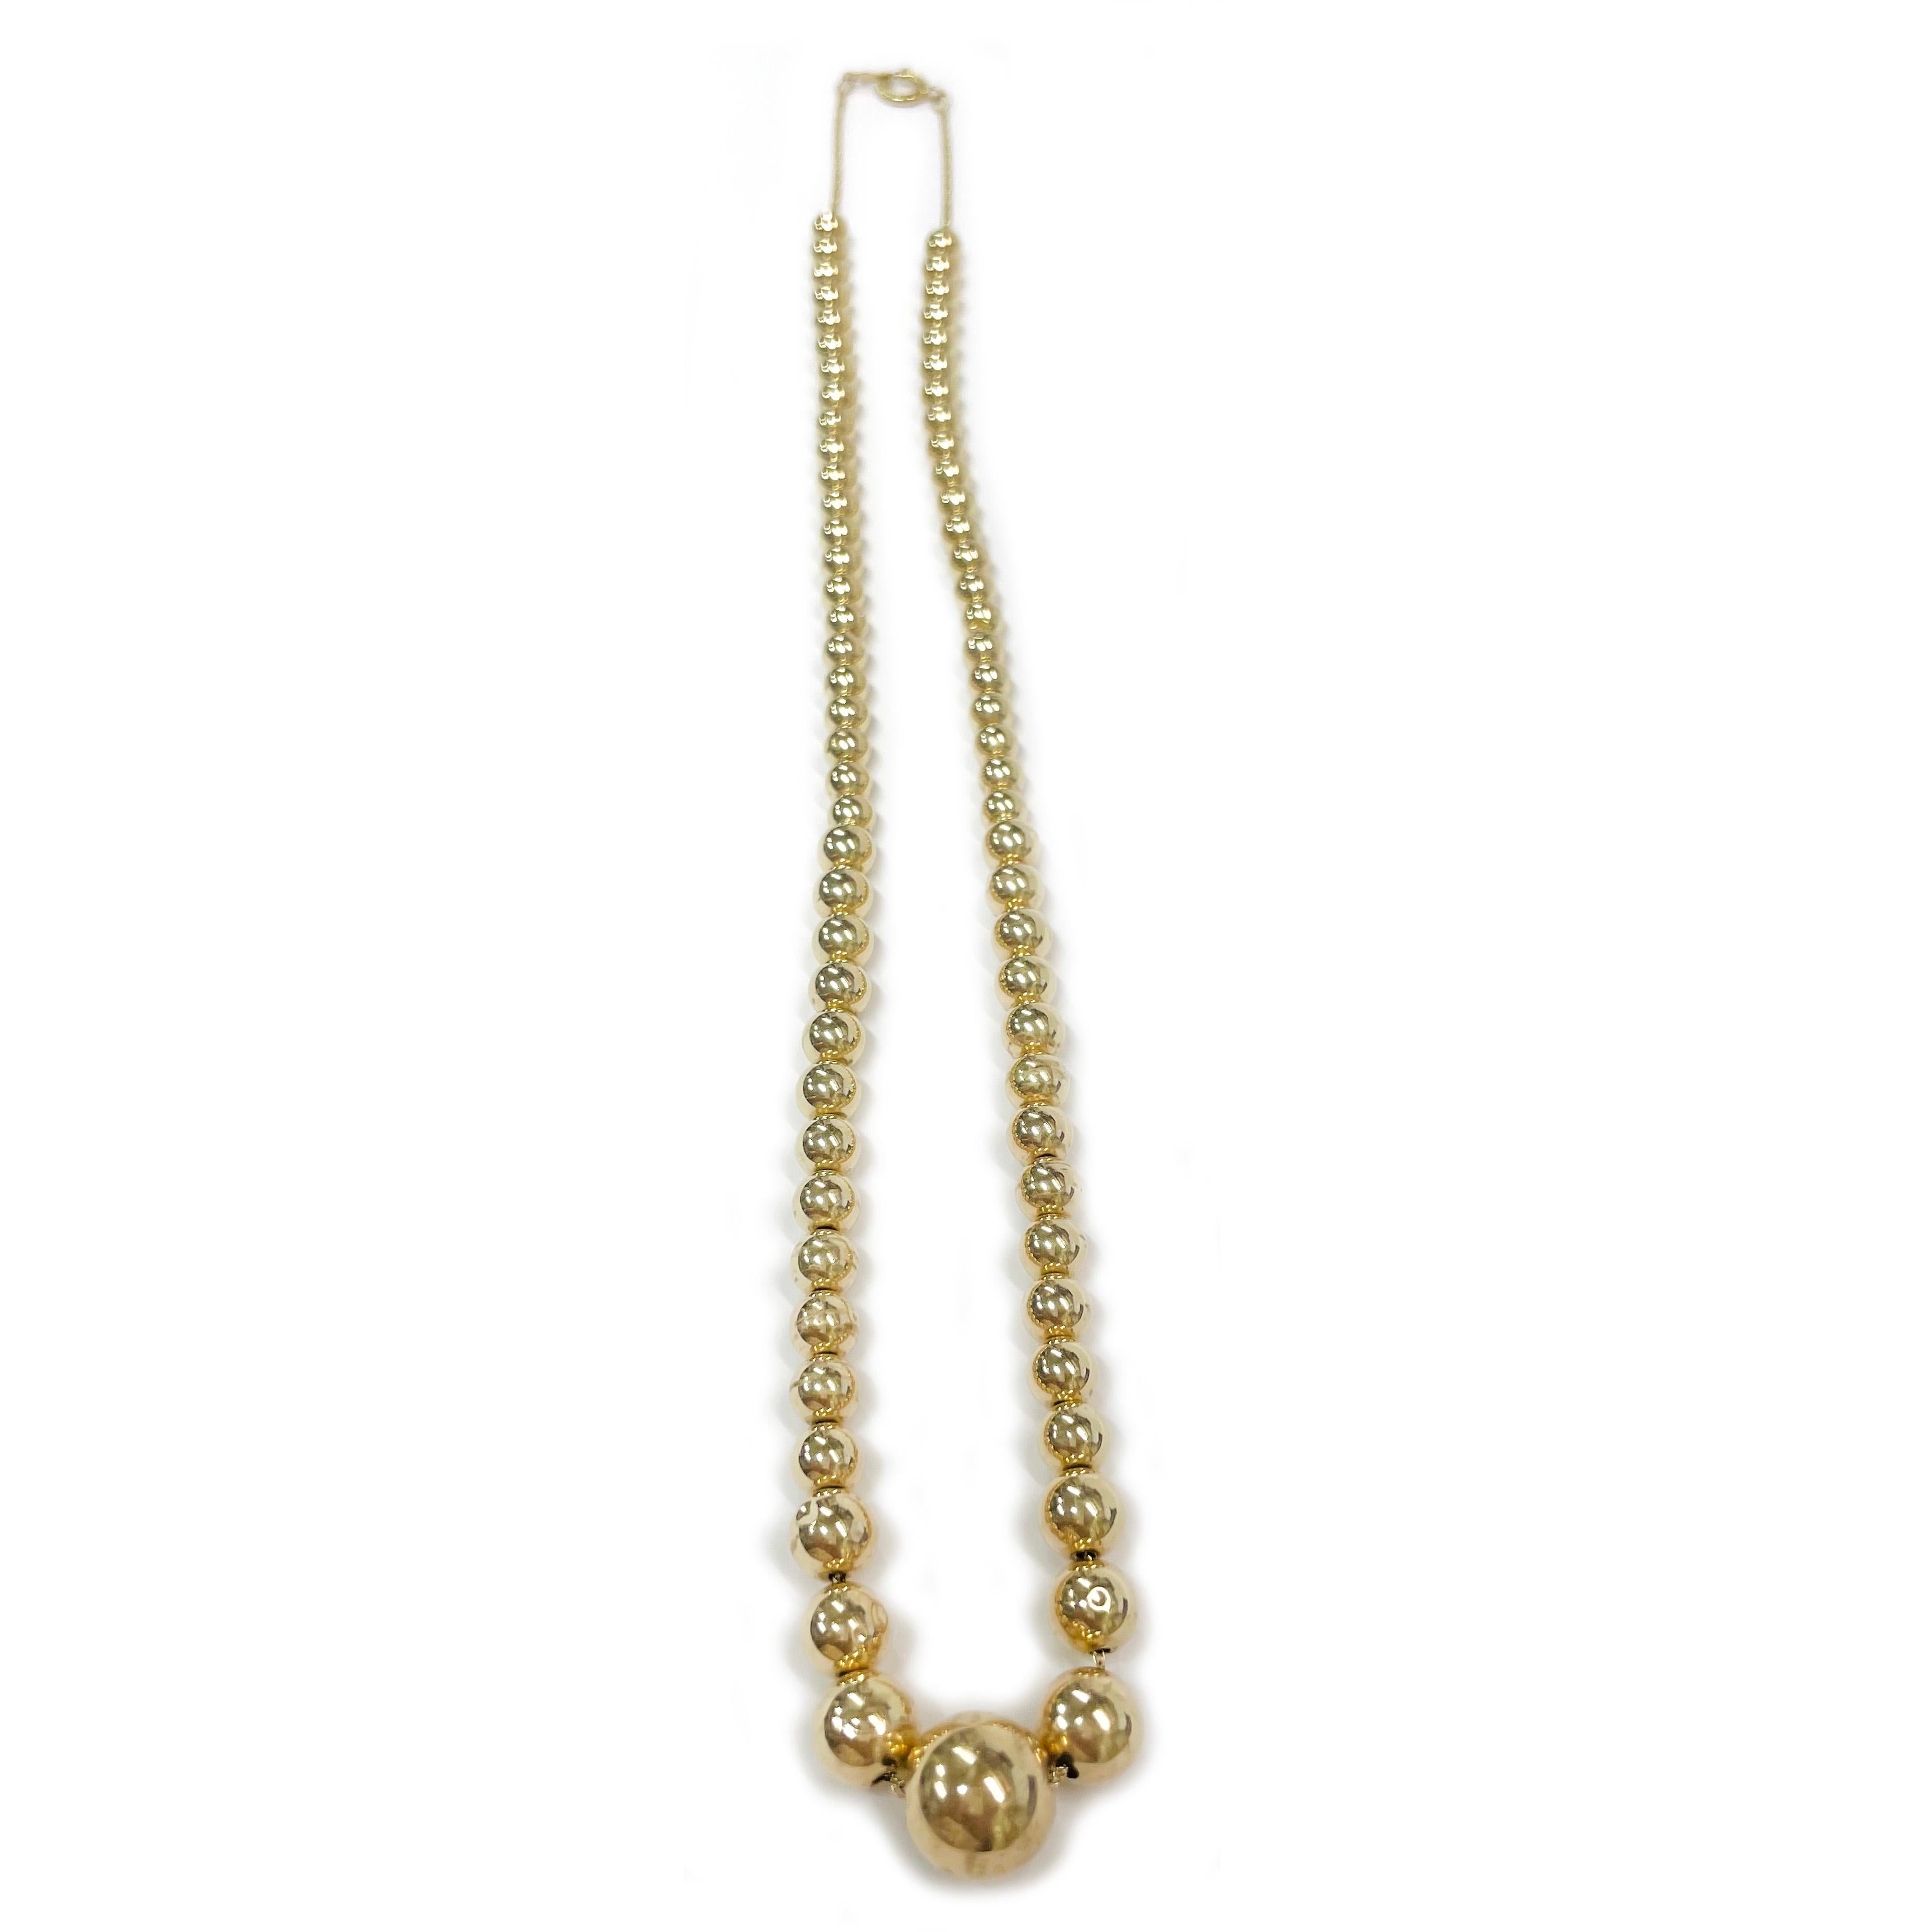 14 Karat Yellow Gold Hollow Beaded Necklace. The necklace features a single strand seventy-four hollow yellow gold round graduate beads. The beads range in size from 4.85 to 11mm. The beads hang on a 14 karat gold link chain. The necklace is 18